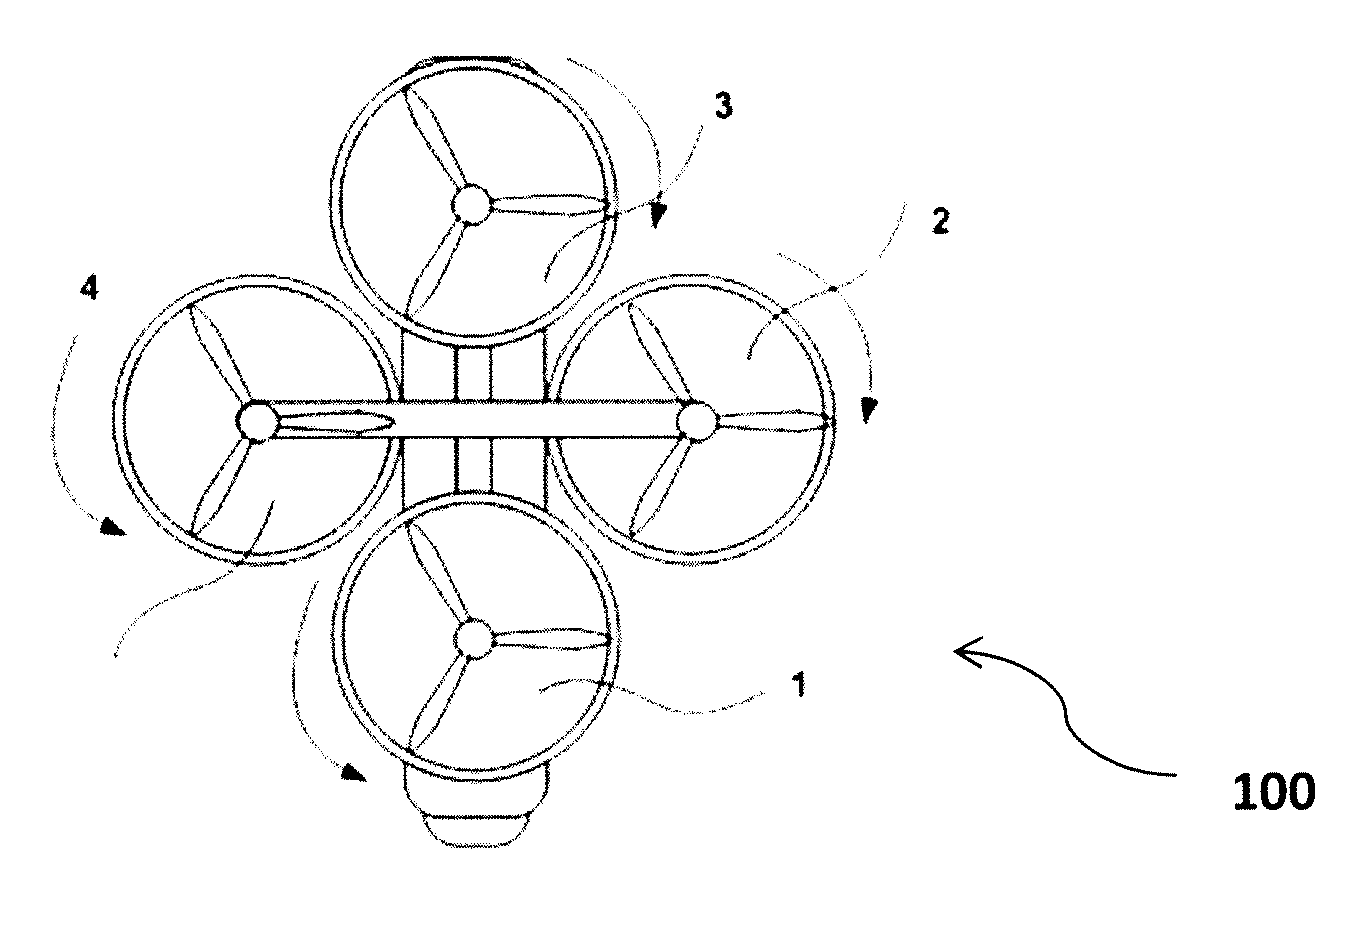 System and method for control of quadrotor air vehicles with tiltable rotors